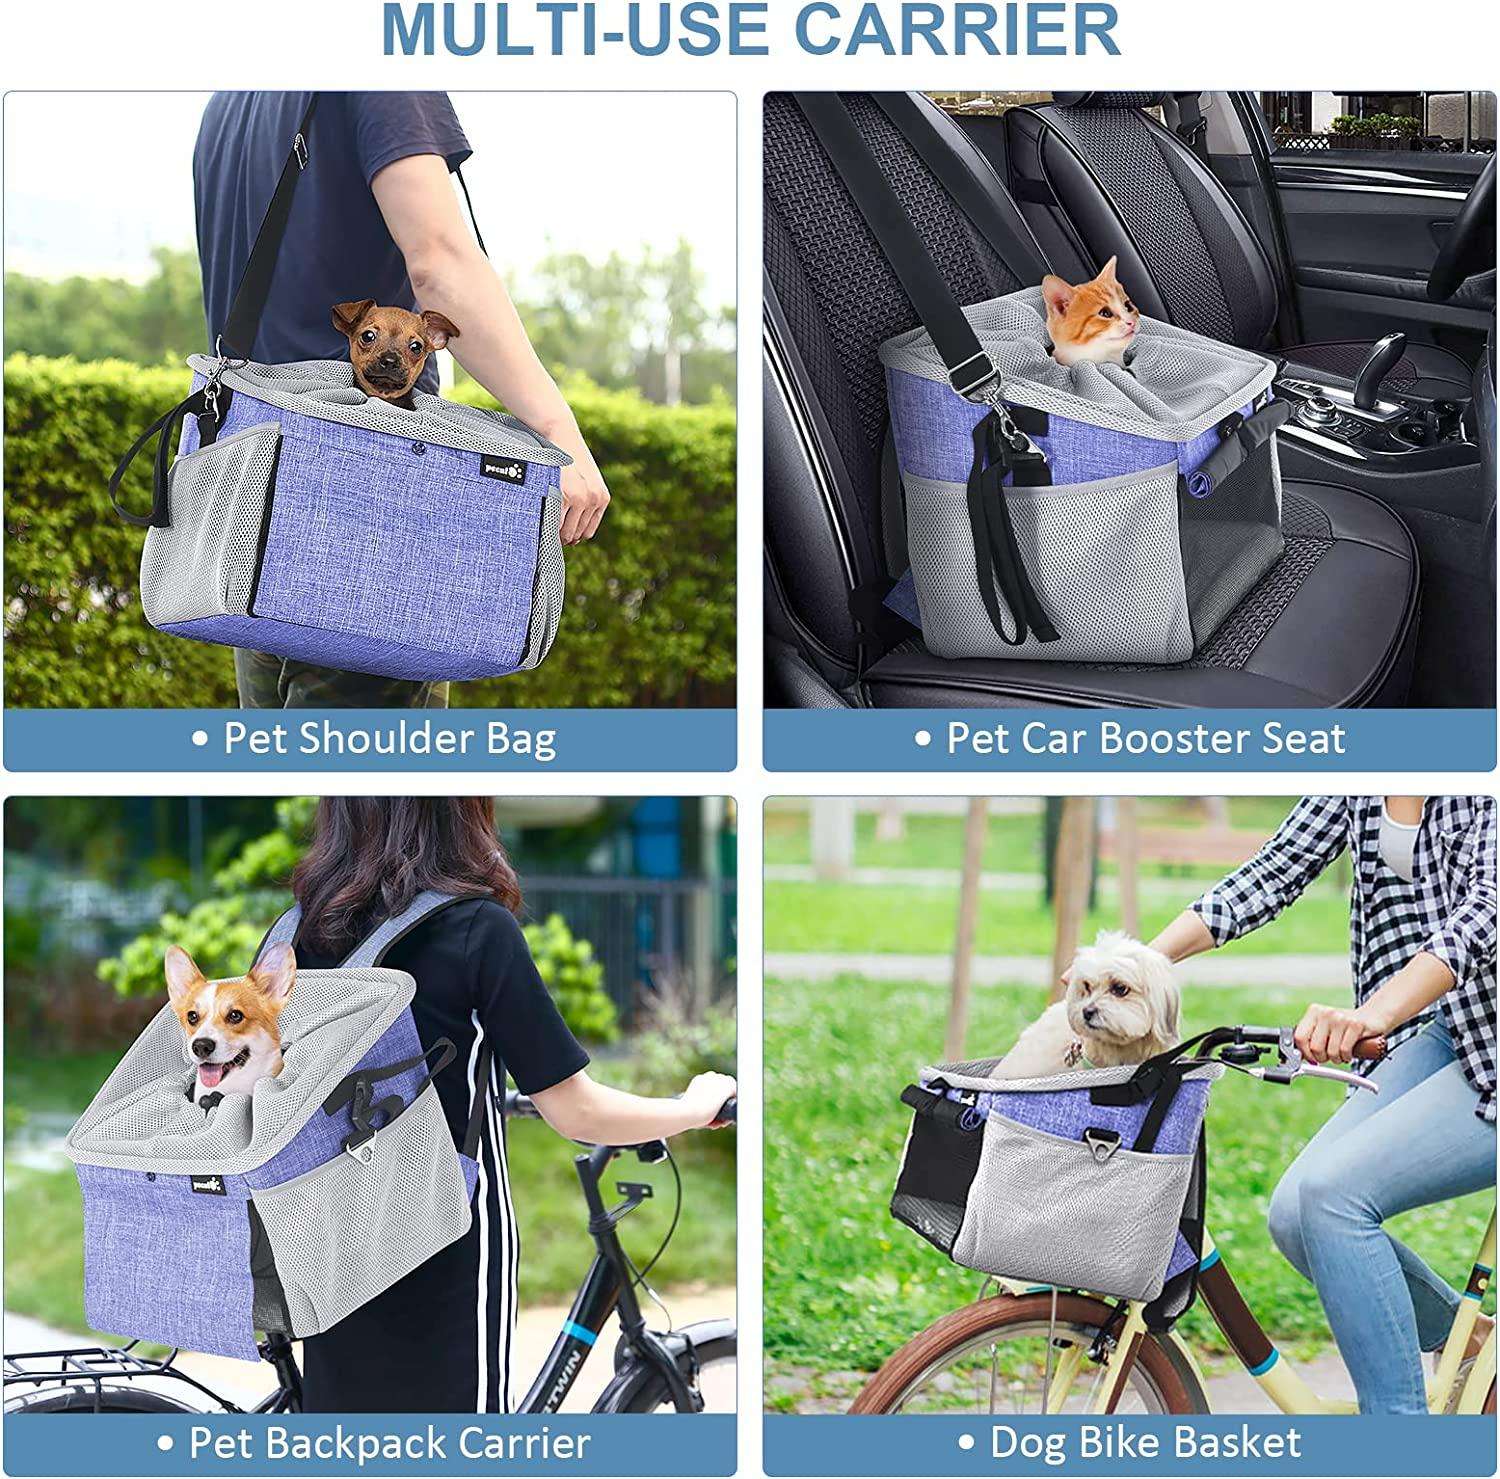 Dog Bike Basket Pet Carrier Bicycle, Car Seat Pet Booster Seat with Portable Breathable Pet Carrier Travel - Bicycle bag - 3